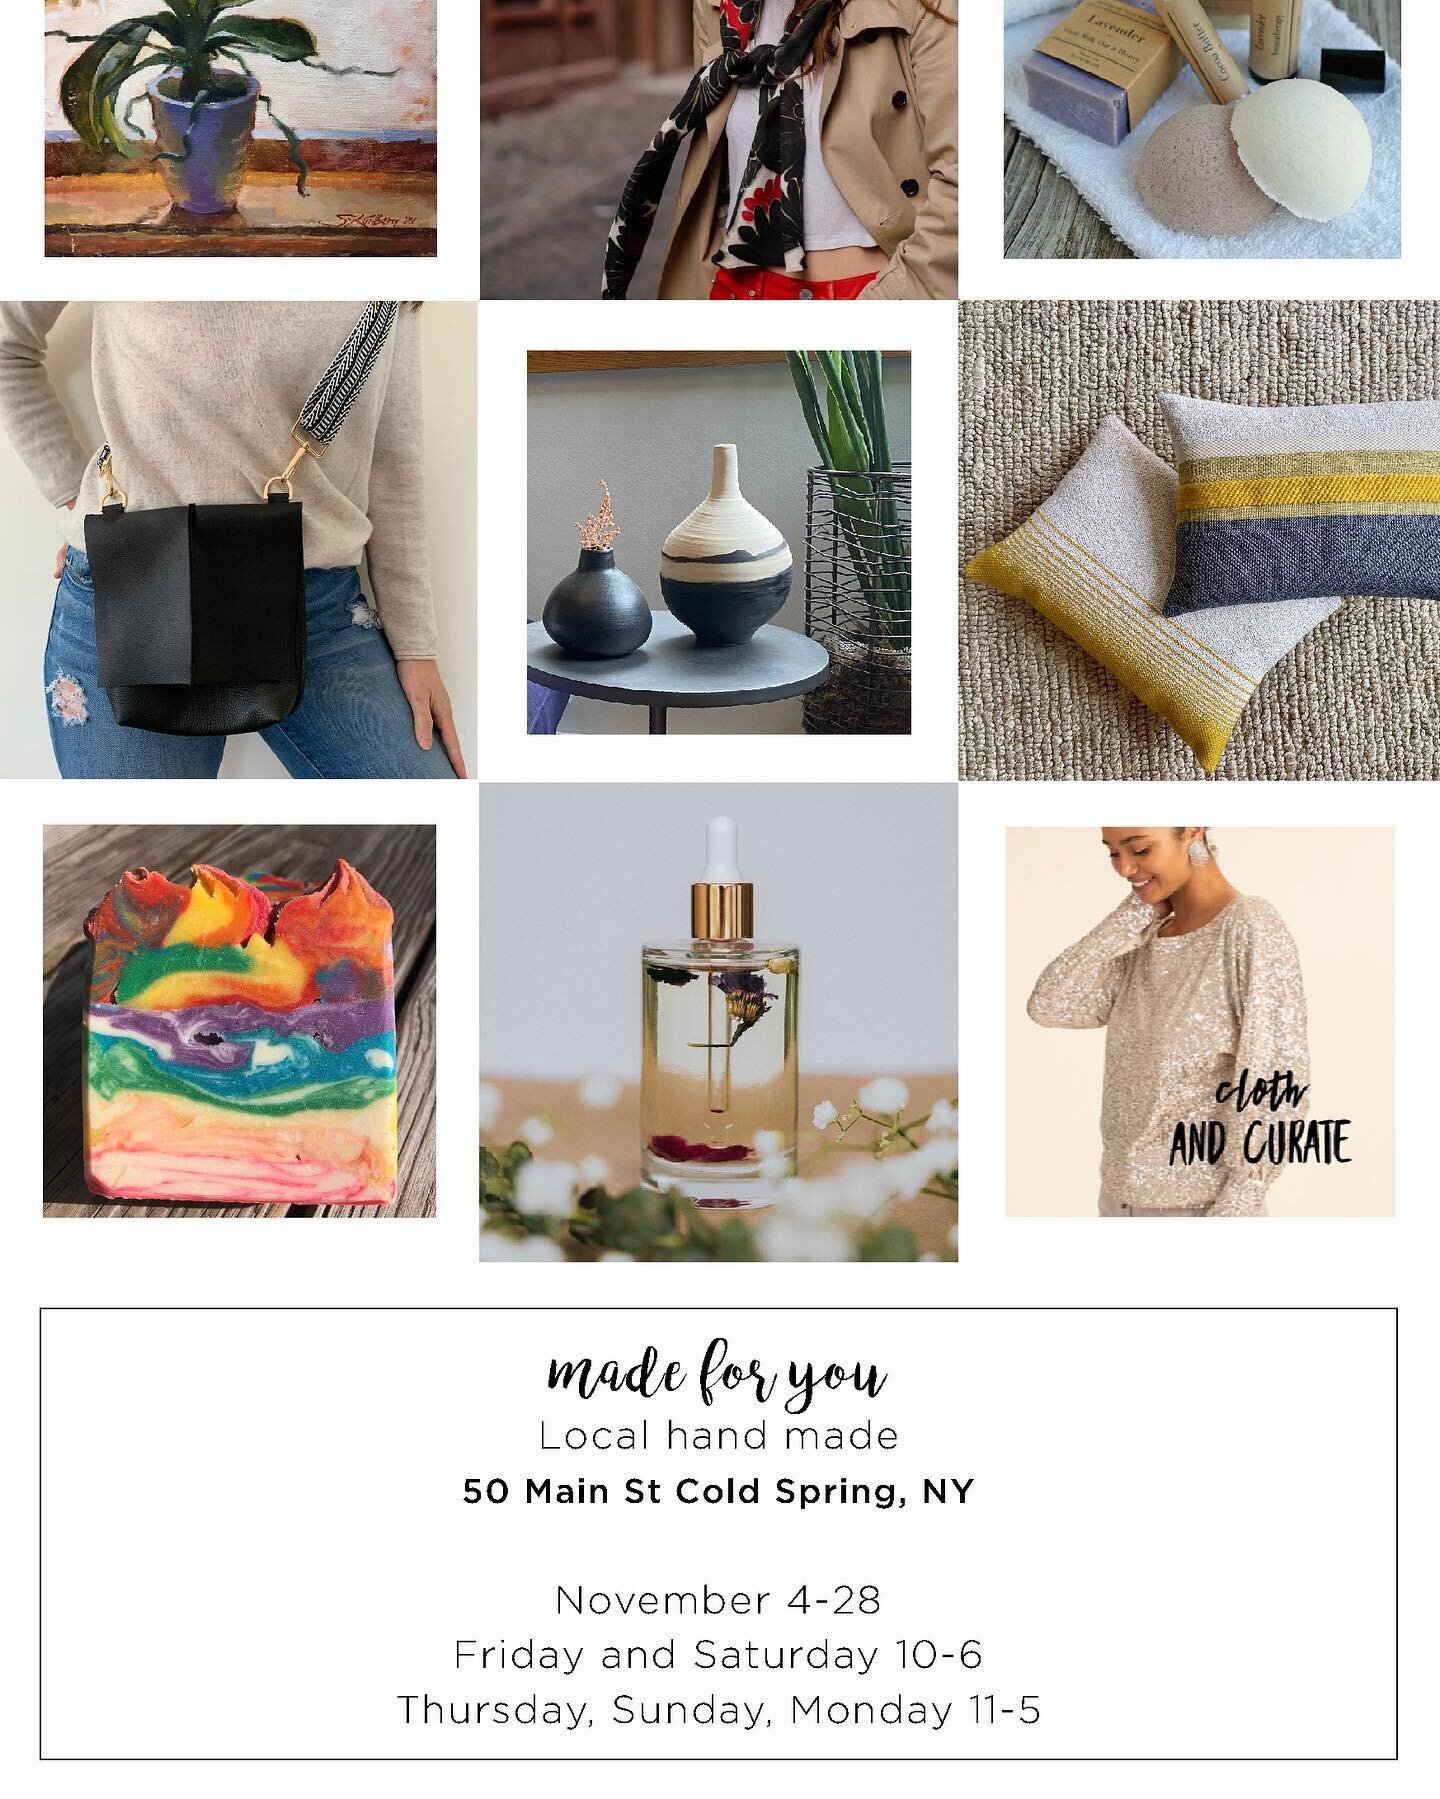 Hey guys, I&rsquo;m happy to announce that HaruNY will be featured in the Grand Opening of the Made for You shop to support local artists and designers.

Come and support local businesses from New York. We are so exited for this launch!

@rcipottery 